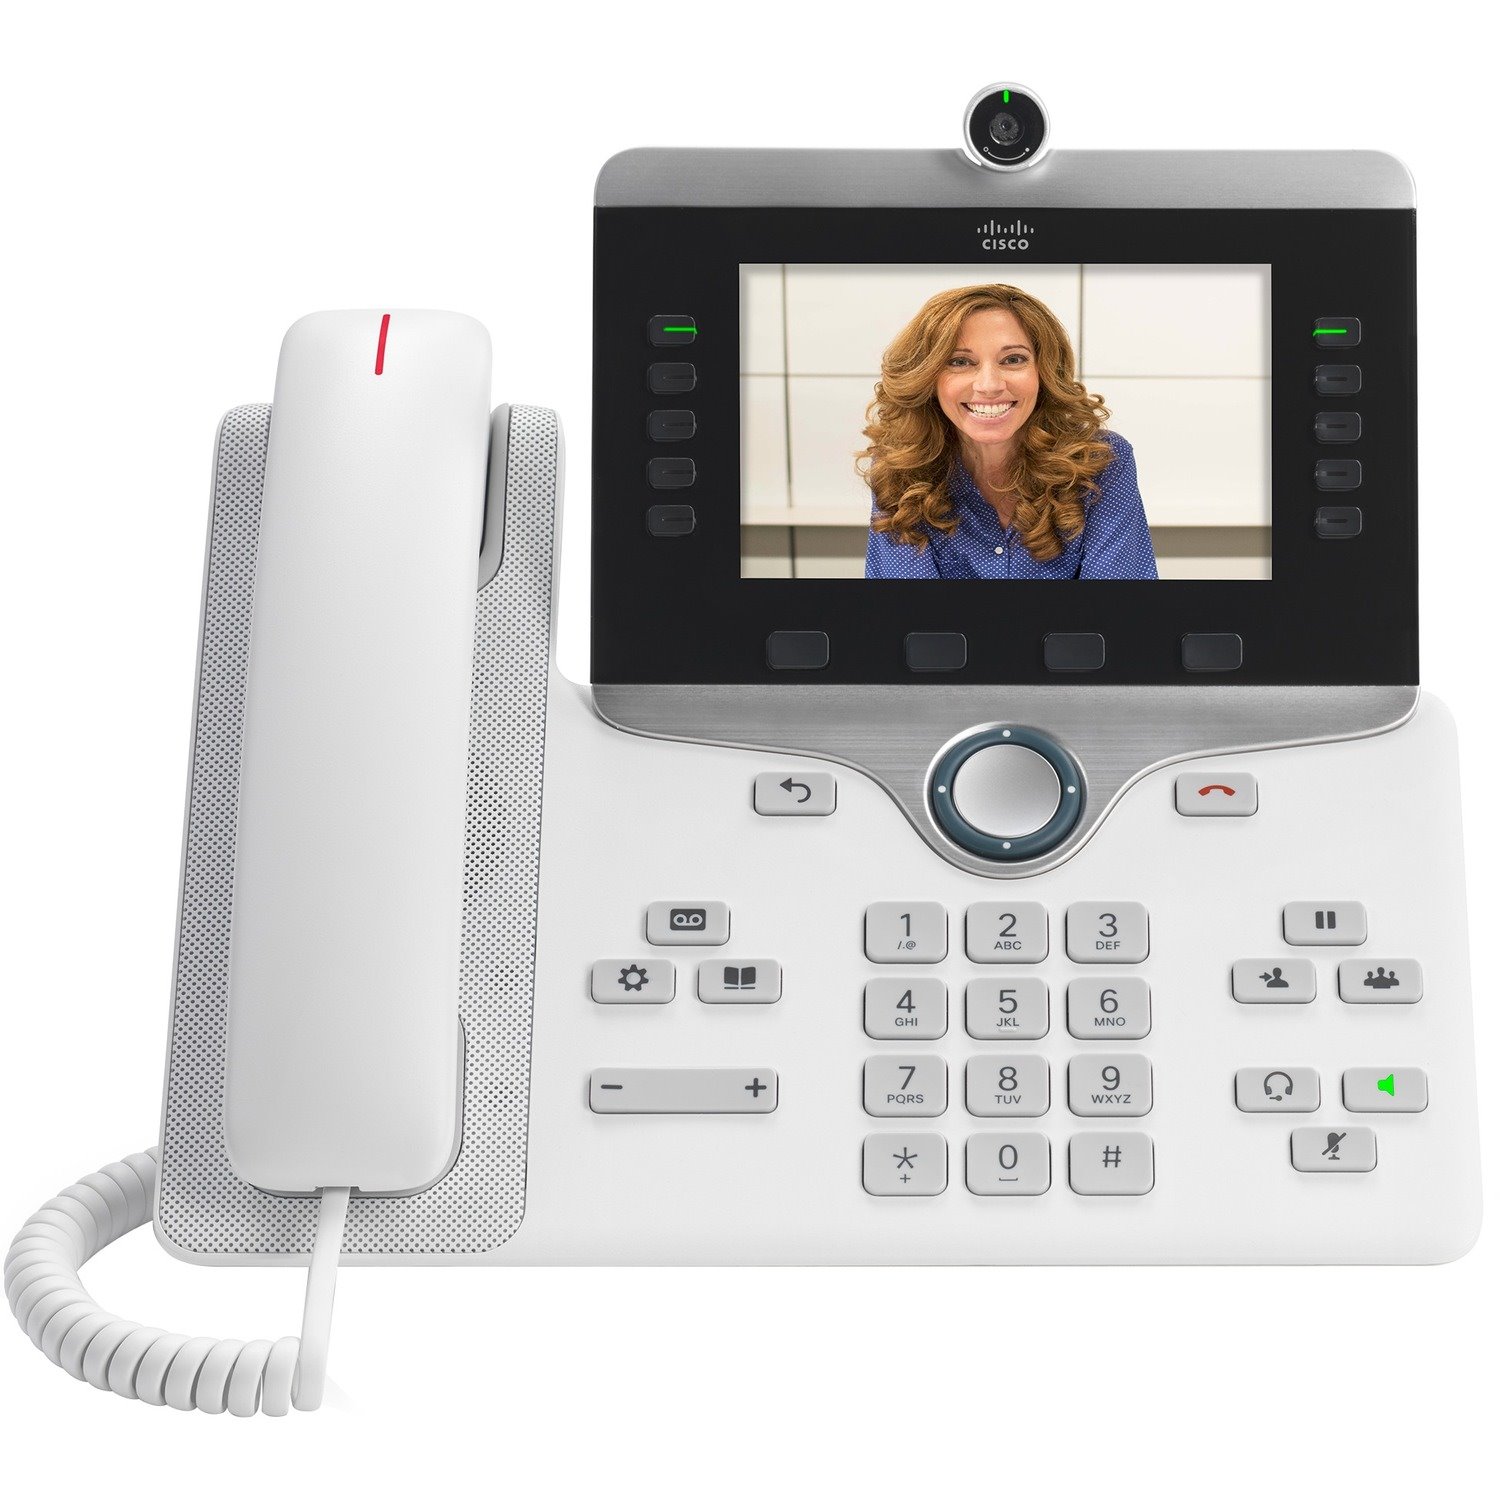 Cisco 8865 IP Phone - Remanufactured - Corded - Corded/Cordless - Bluetooth, Wi-Fi - Desktop, Wall Mountable - White